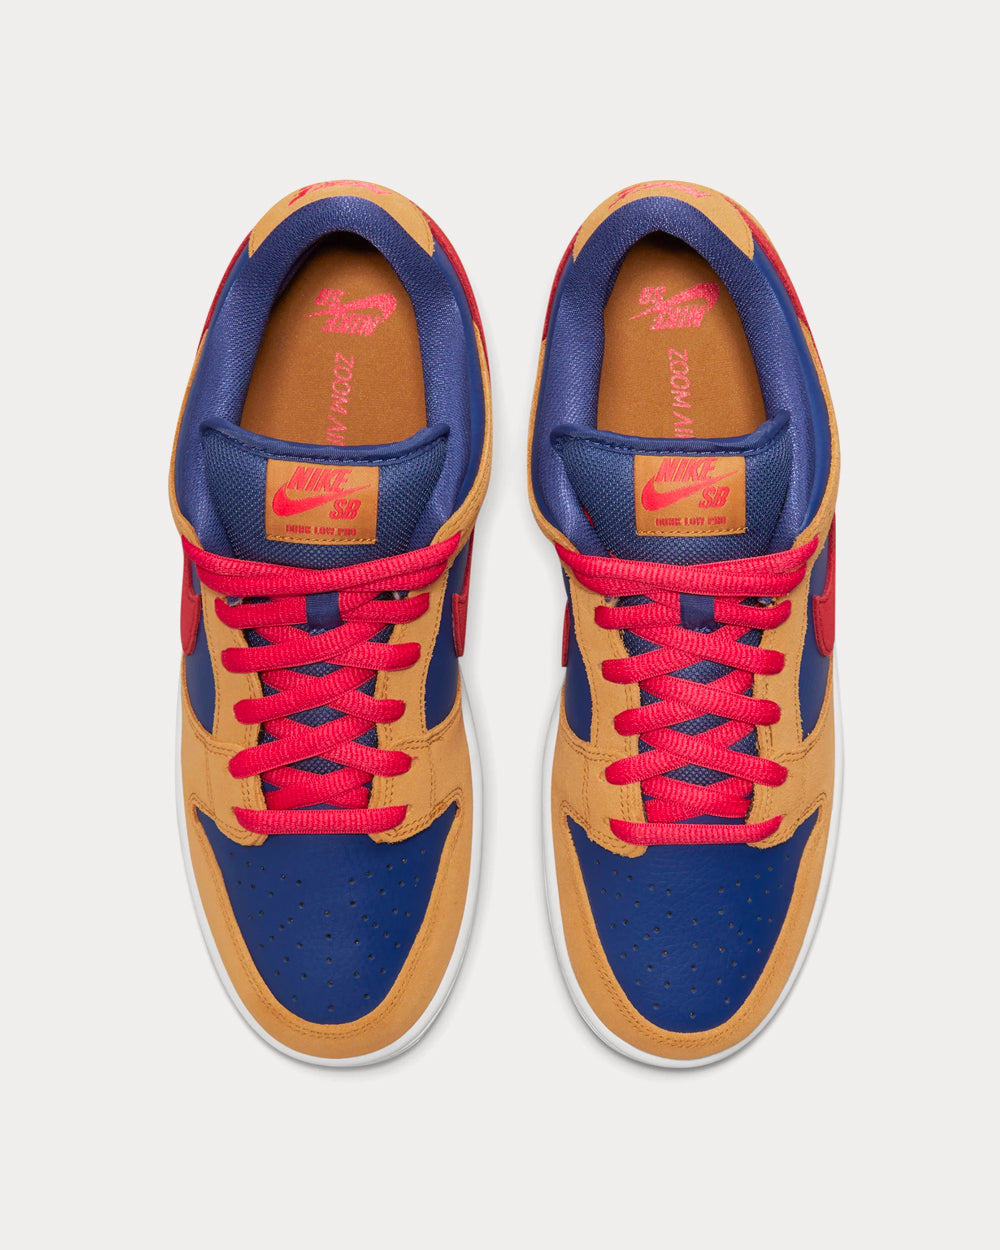 Nike SB Dunk Low Pro Wheat / Red / Purple / White Low Top Sneakers 